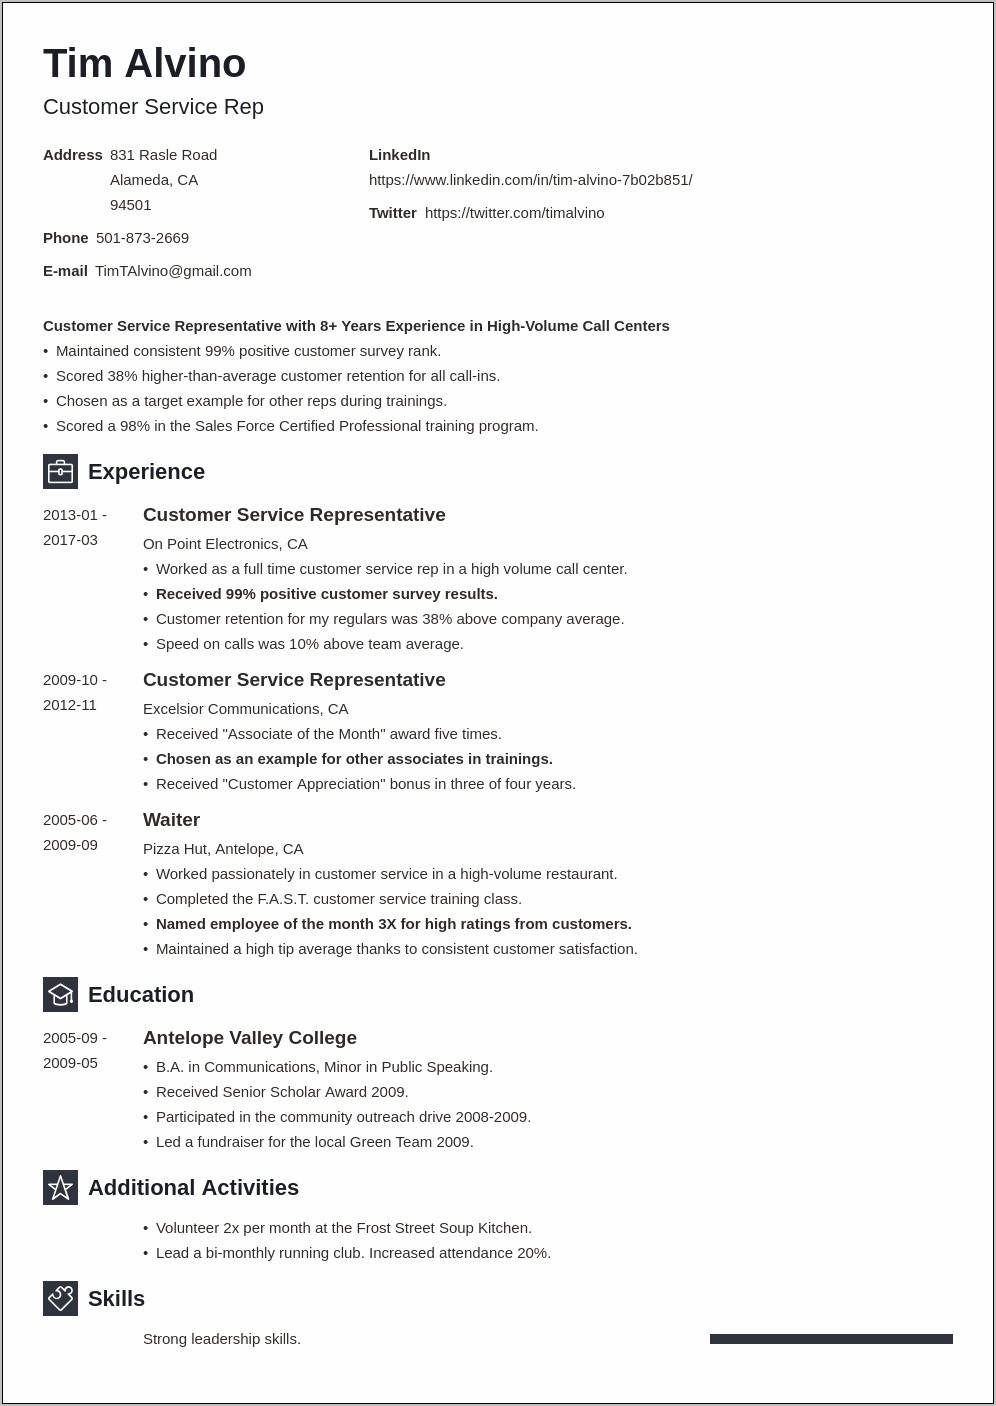 Add Work Experience In Resume But Change Titles